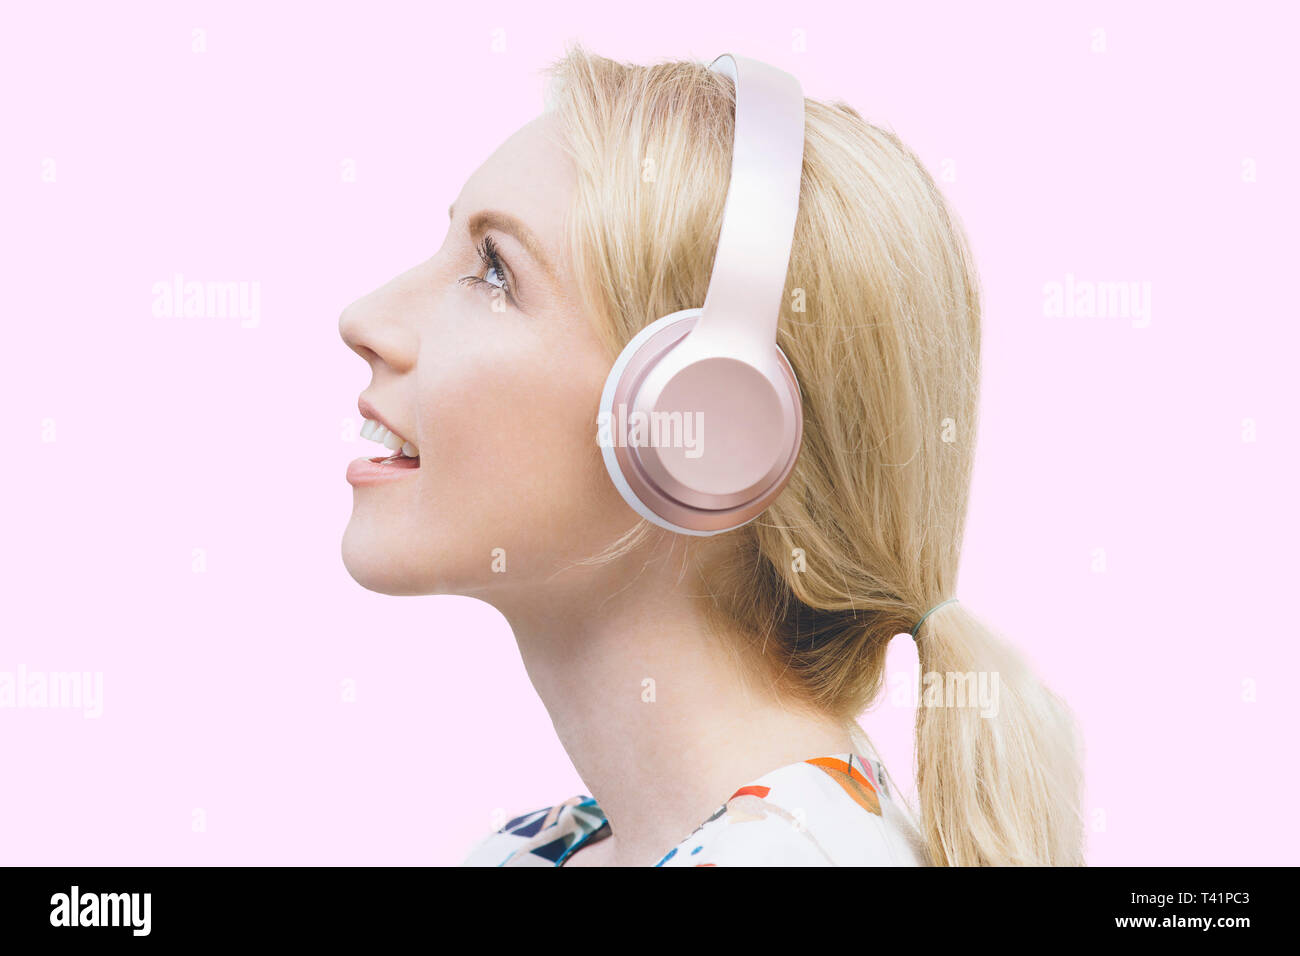 Female with blond hair listens to her headphones and is inspired Stock Photo